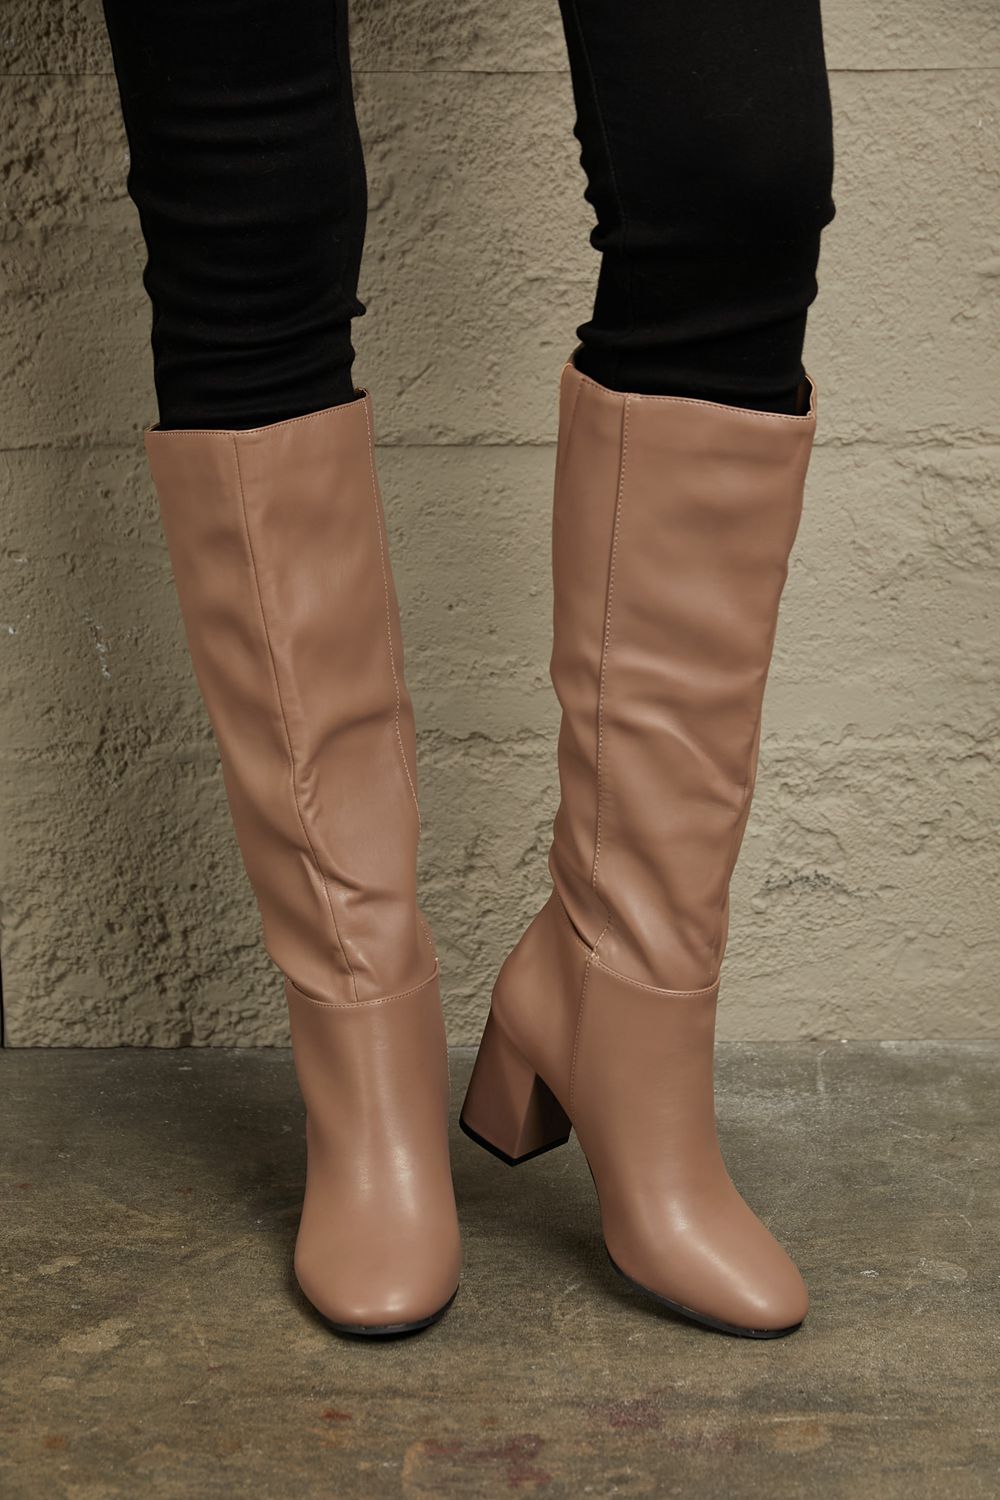 East Lion Corp Block Heel Knee High Boots - Fashion Girl Online Store